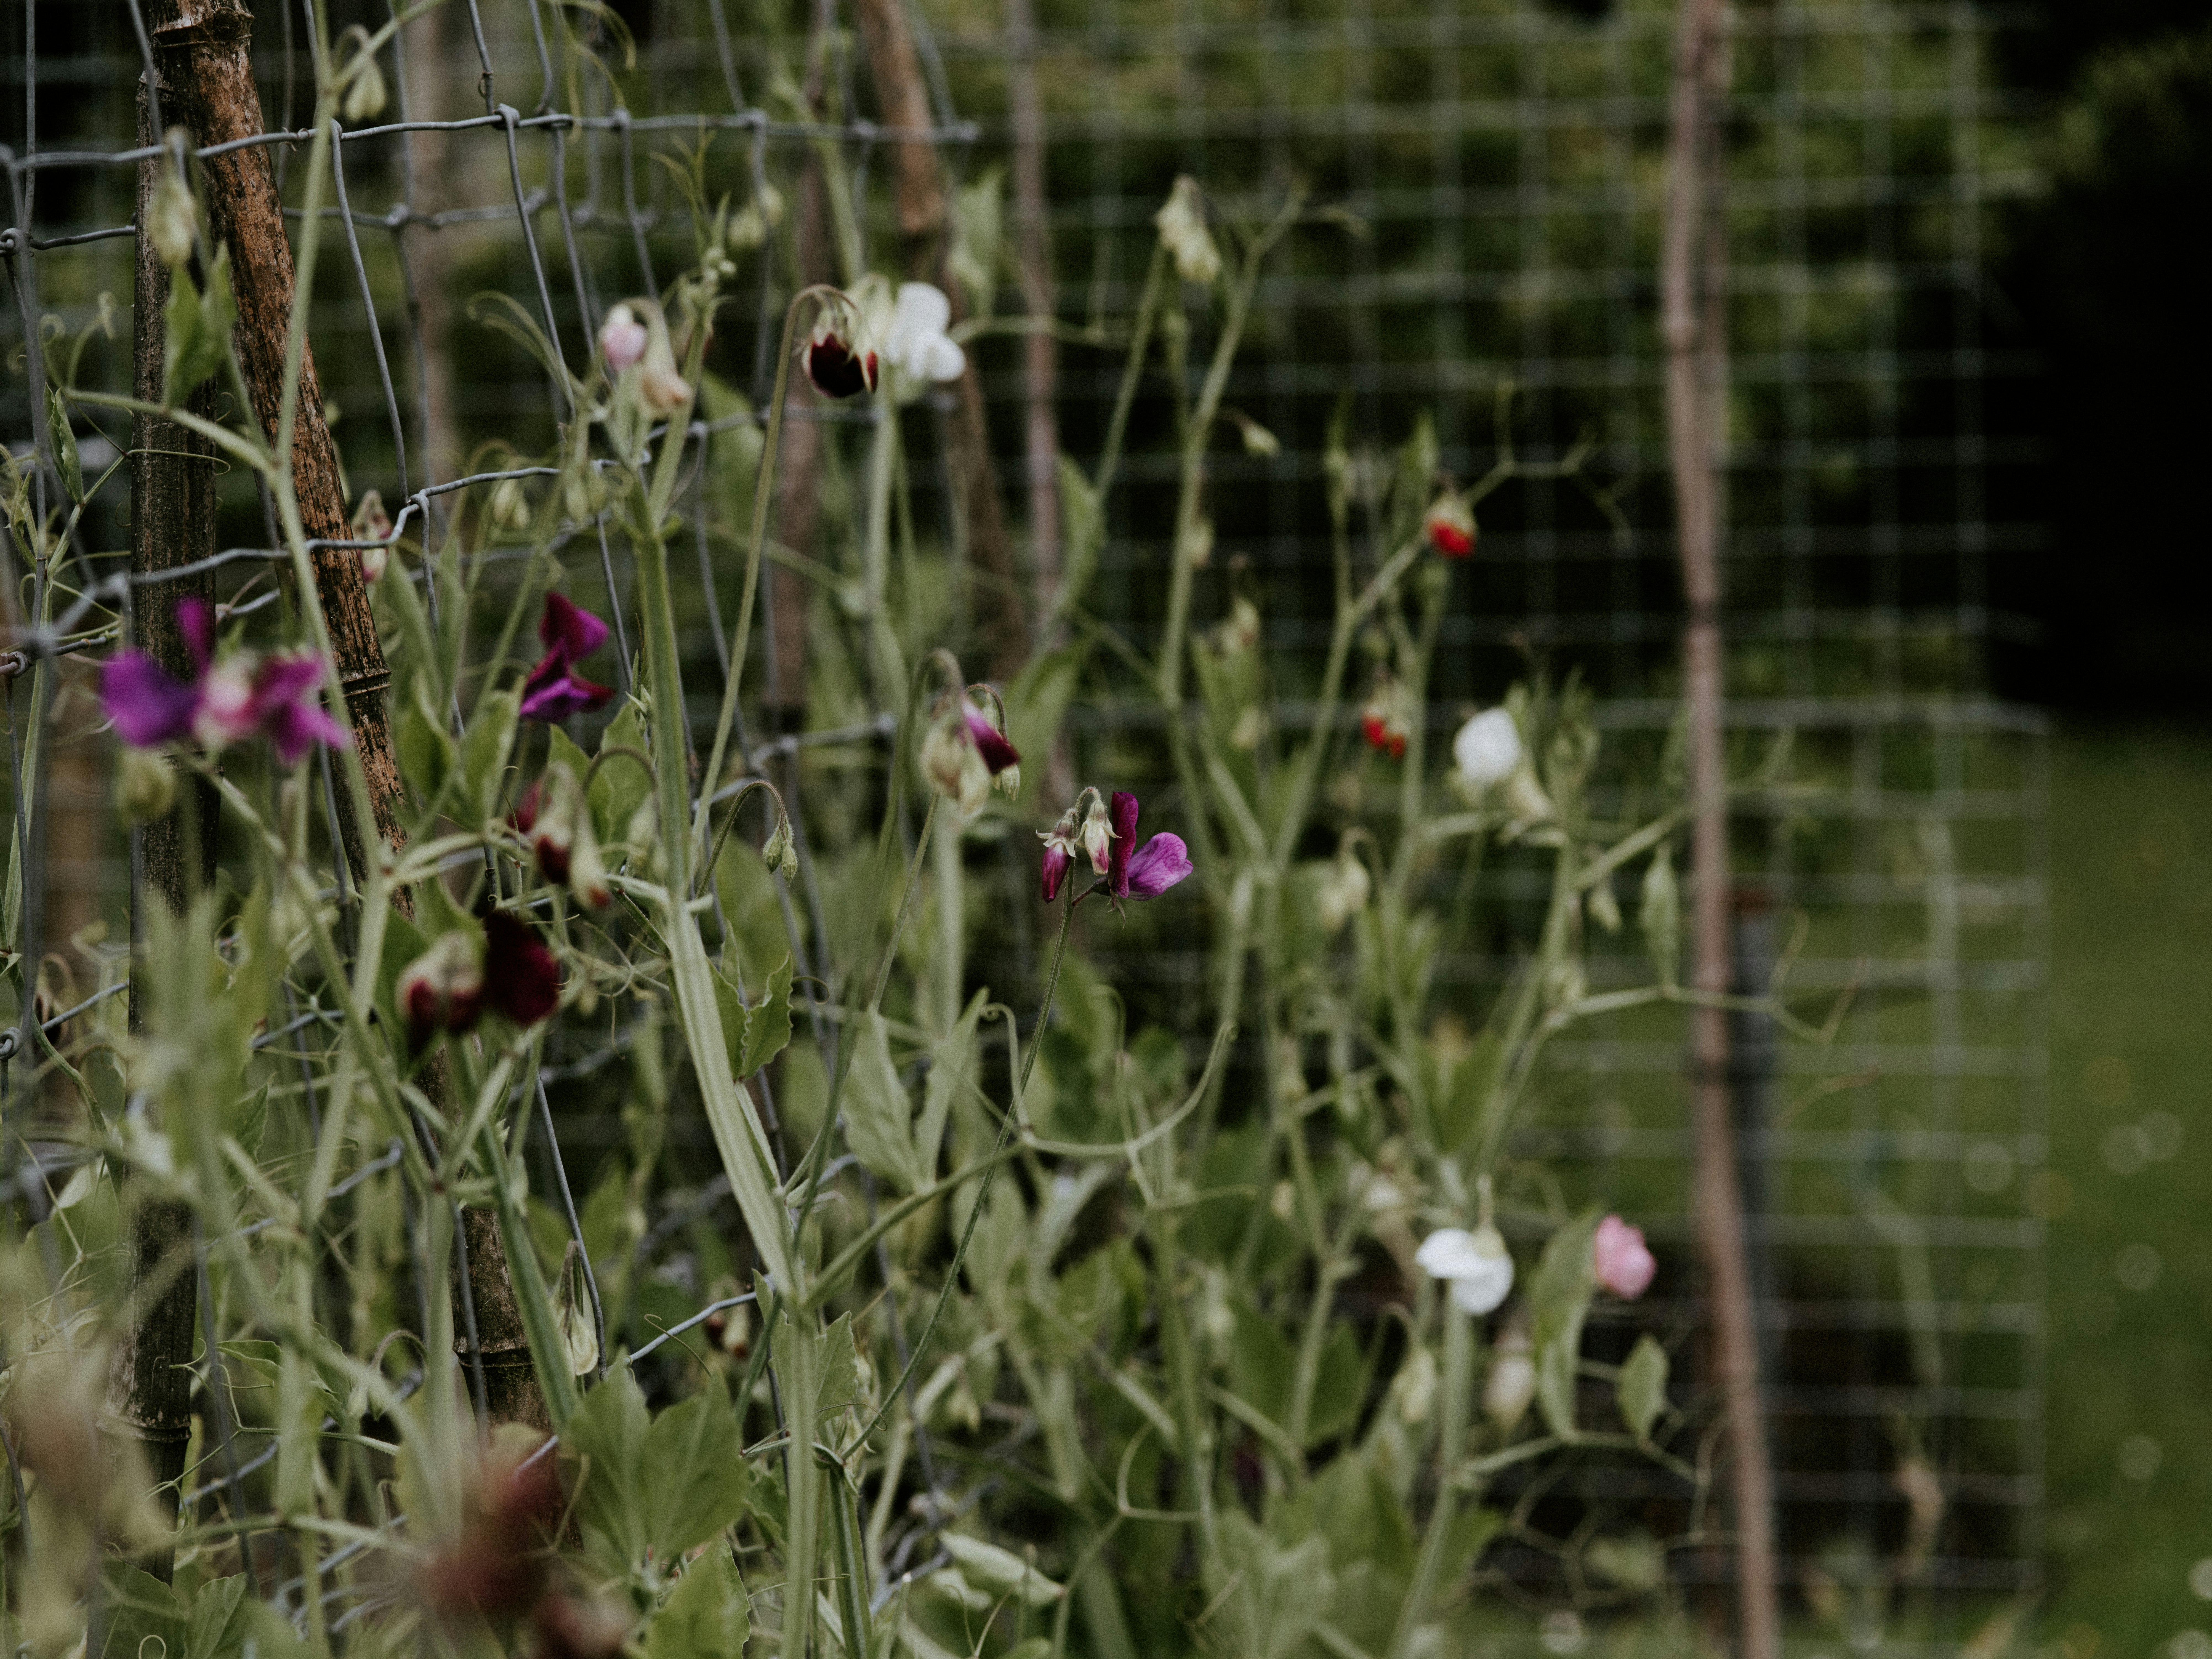 white and pink flowers in front of black metal fence